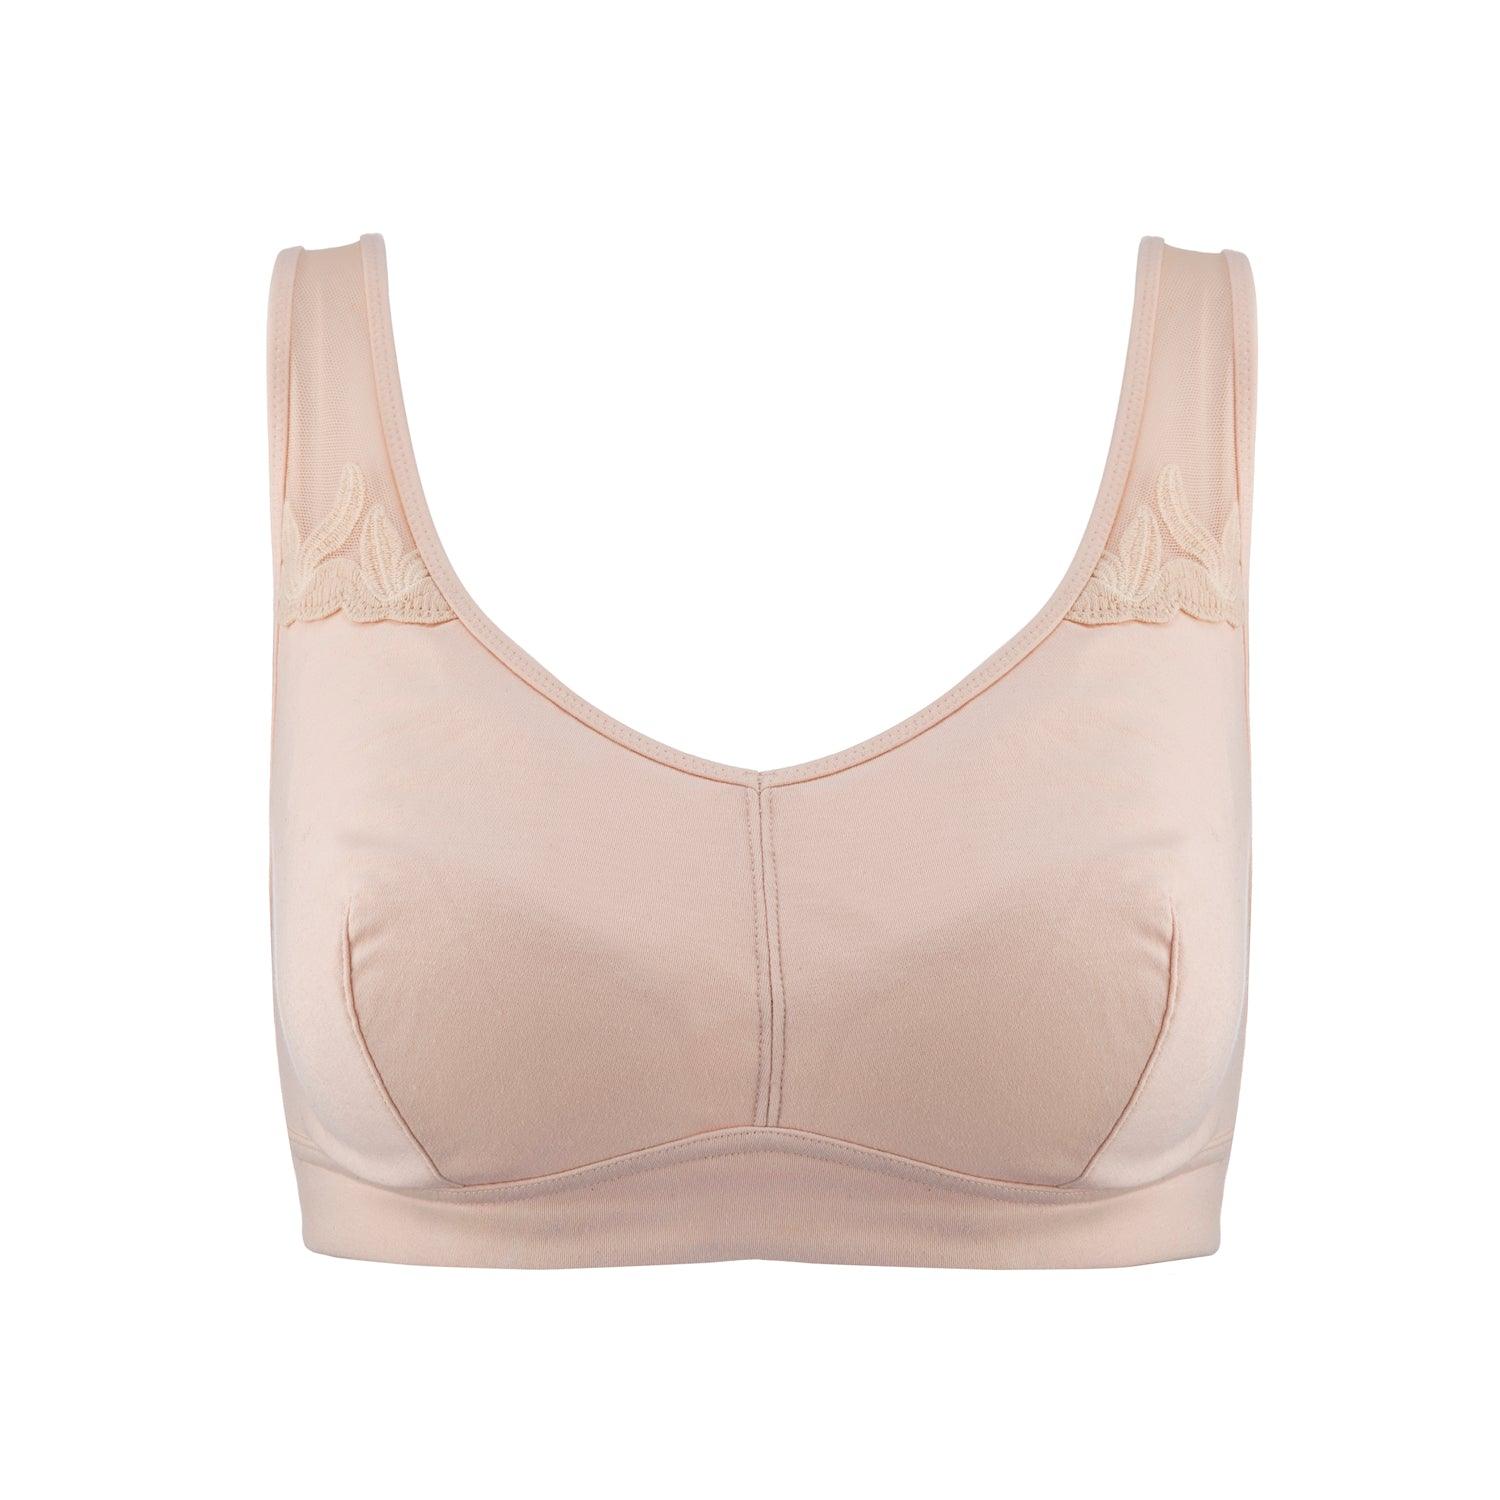 Women'secret - Our collection of bras made of #organiccotton is